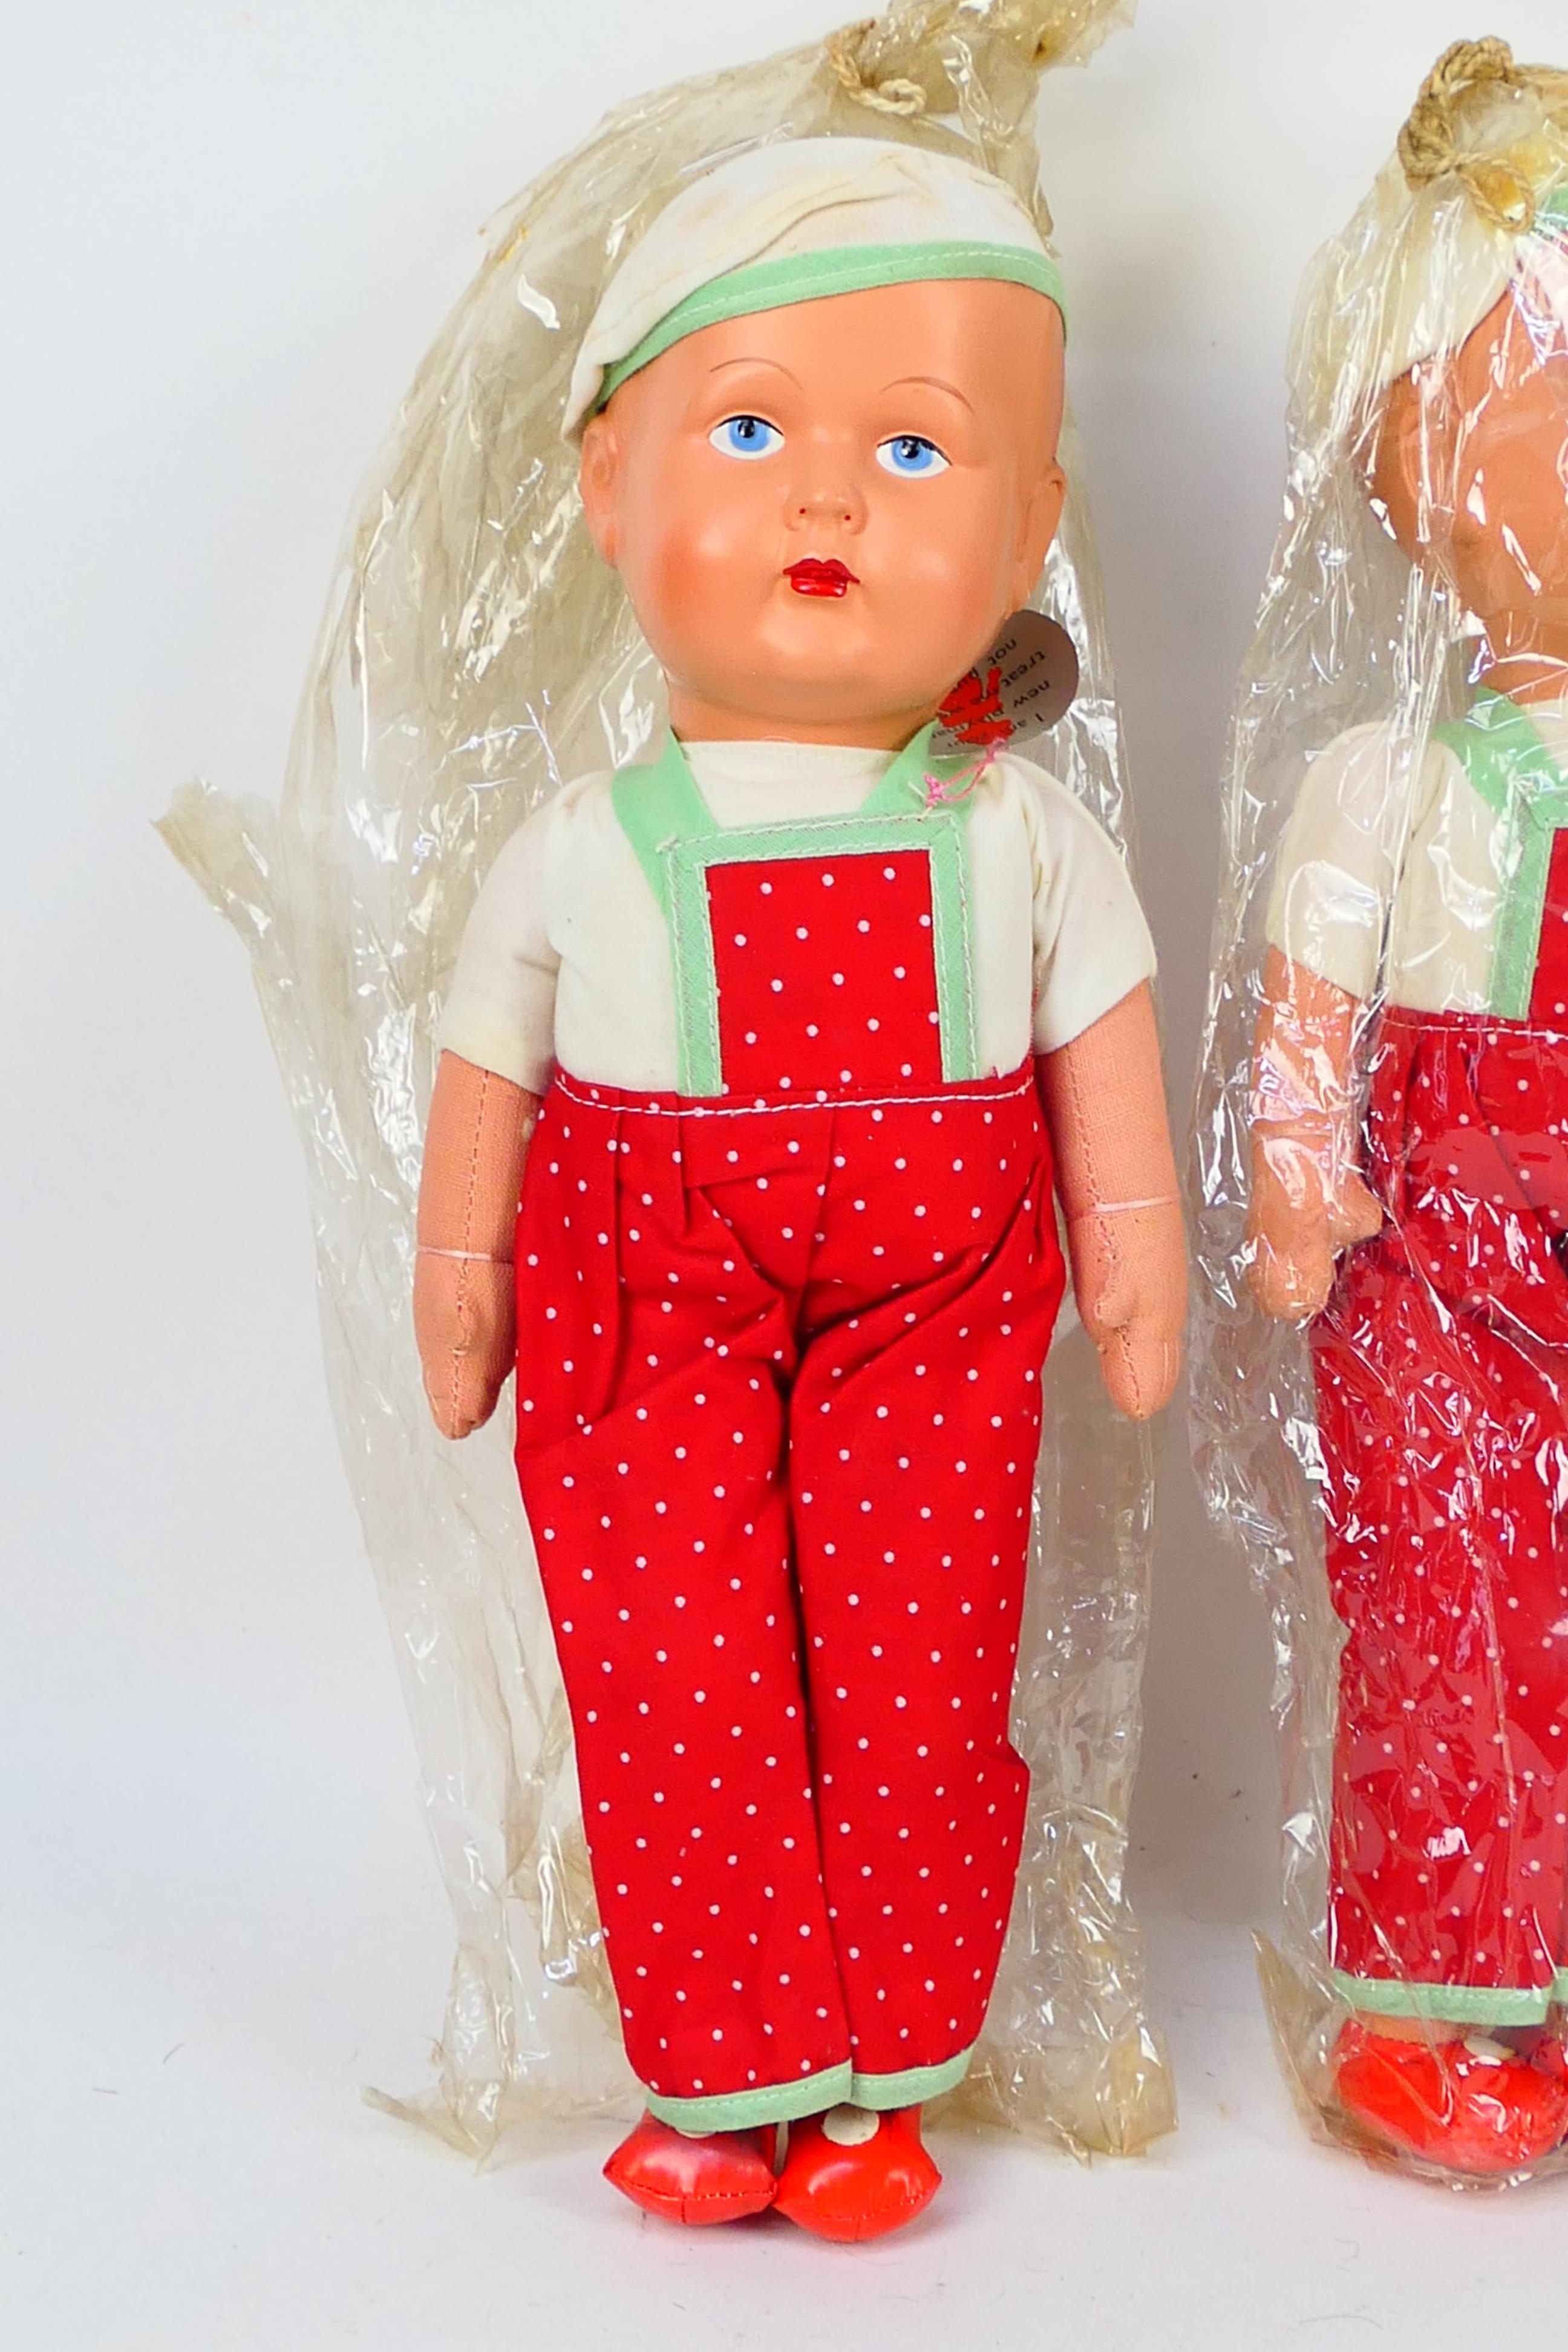 Palitoy - Four bagged Palitoy Soft Dolls. Lot consists of two 14" boy dolls and two 14" girl dolls. - Image 2 of 4